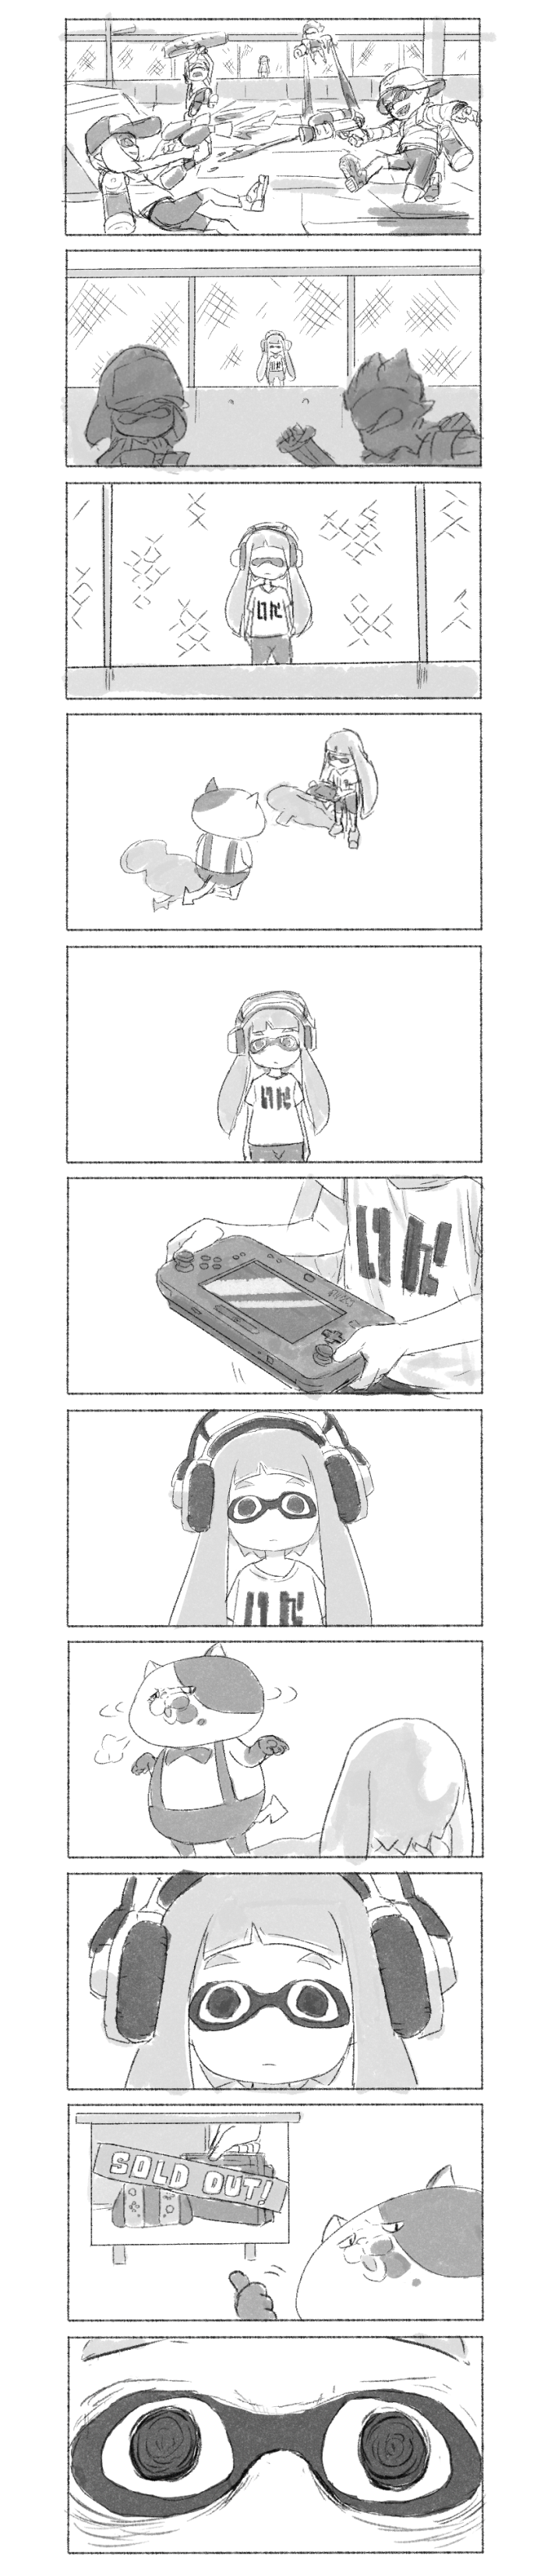 3girls :| =3 @_@ absurdres baseball_cap battle bionekojita bow bowtie cat chain-link_fence close-up closed_mouth comic commentary controller domino_mask expressionless eyes fence game_console game_controller greyscale hat headphones highres holding holding_weapon inkling jajji-kun_(splatoon) joy-con long_hair long_image long_sleeves mask monochrome motion_lines multiple_boys multiple_girls nintendo nintendo_switch nintendo_switch_dock pointing pointy_ears shaking_head shirt short_hair short_sleeves shorts sigh silent_comic splat_dualies_(splatoon) splat_roller_(splatoon) splatoon_(series) splatoon_2 standing suspenders t-shirt tall_image tentacle_hair weapon wii_u wii_u_gamepad zooming_in